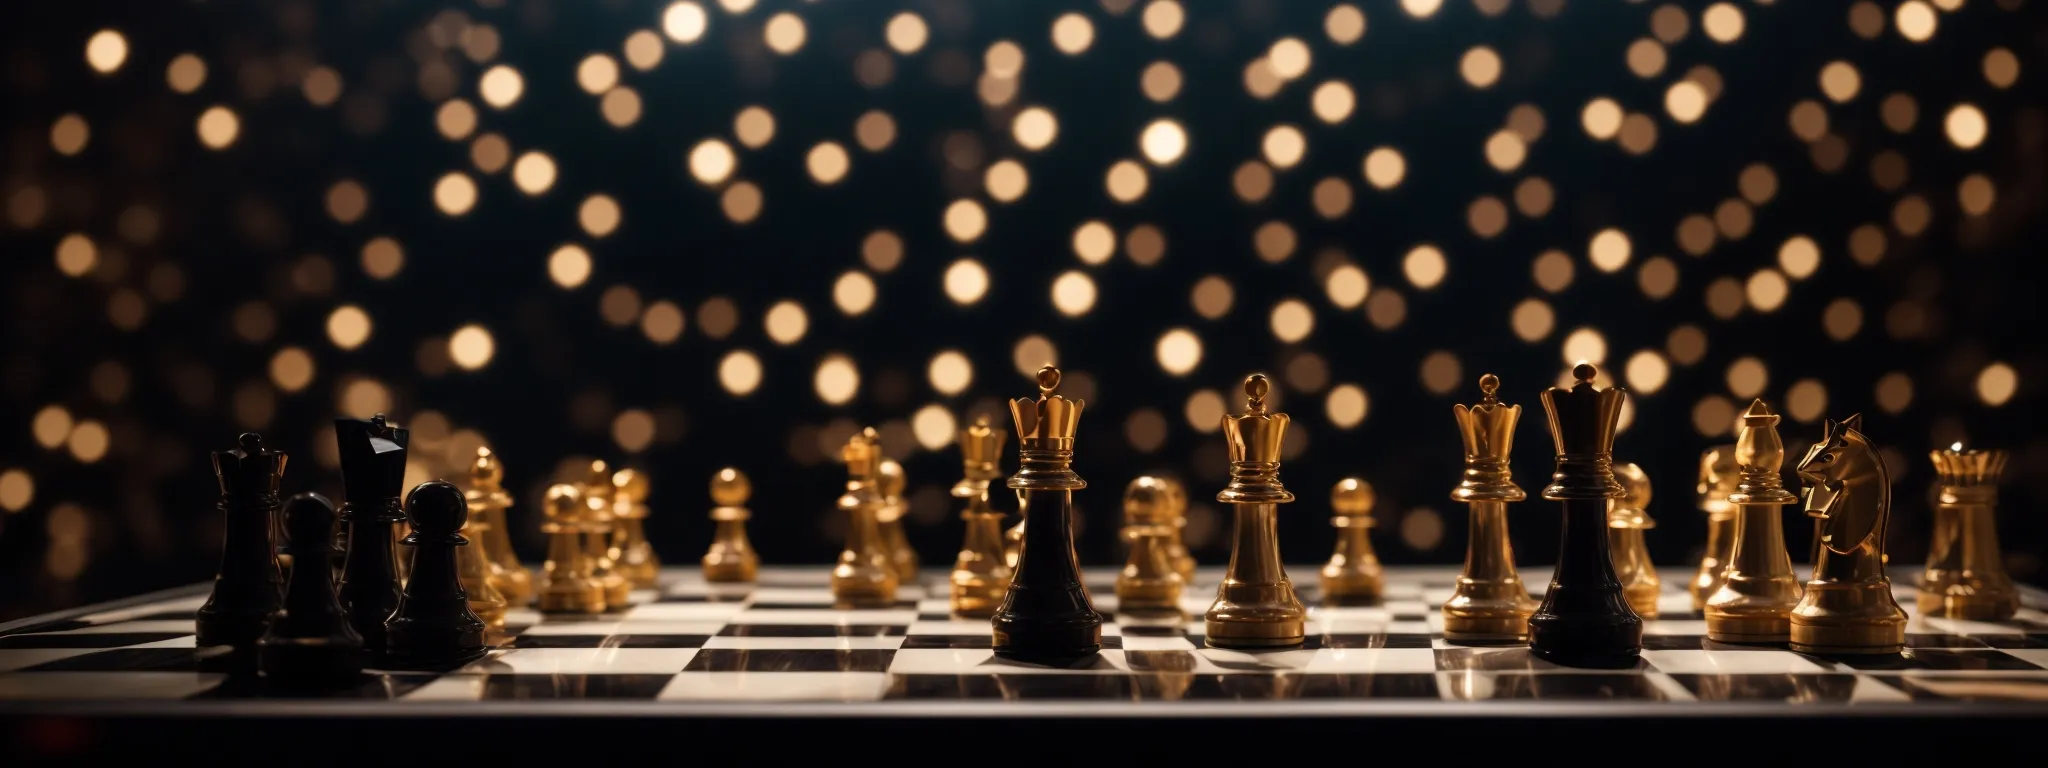 a chessboard against a backdrop of glowing digital screens showcasing diverse web pages.